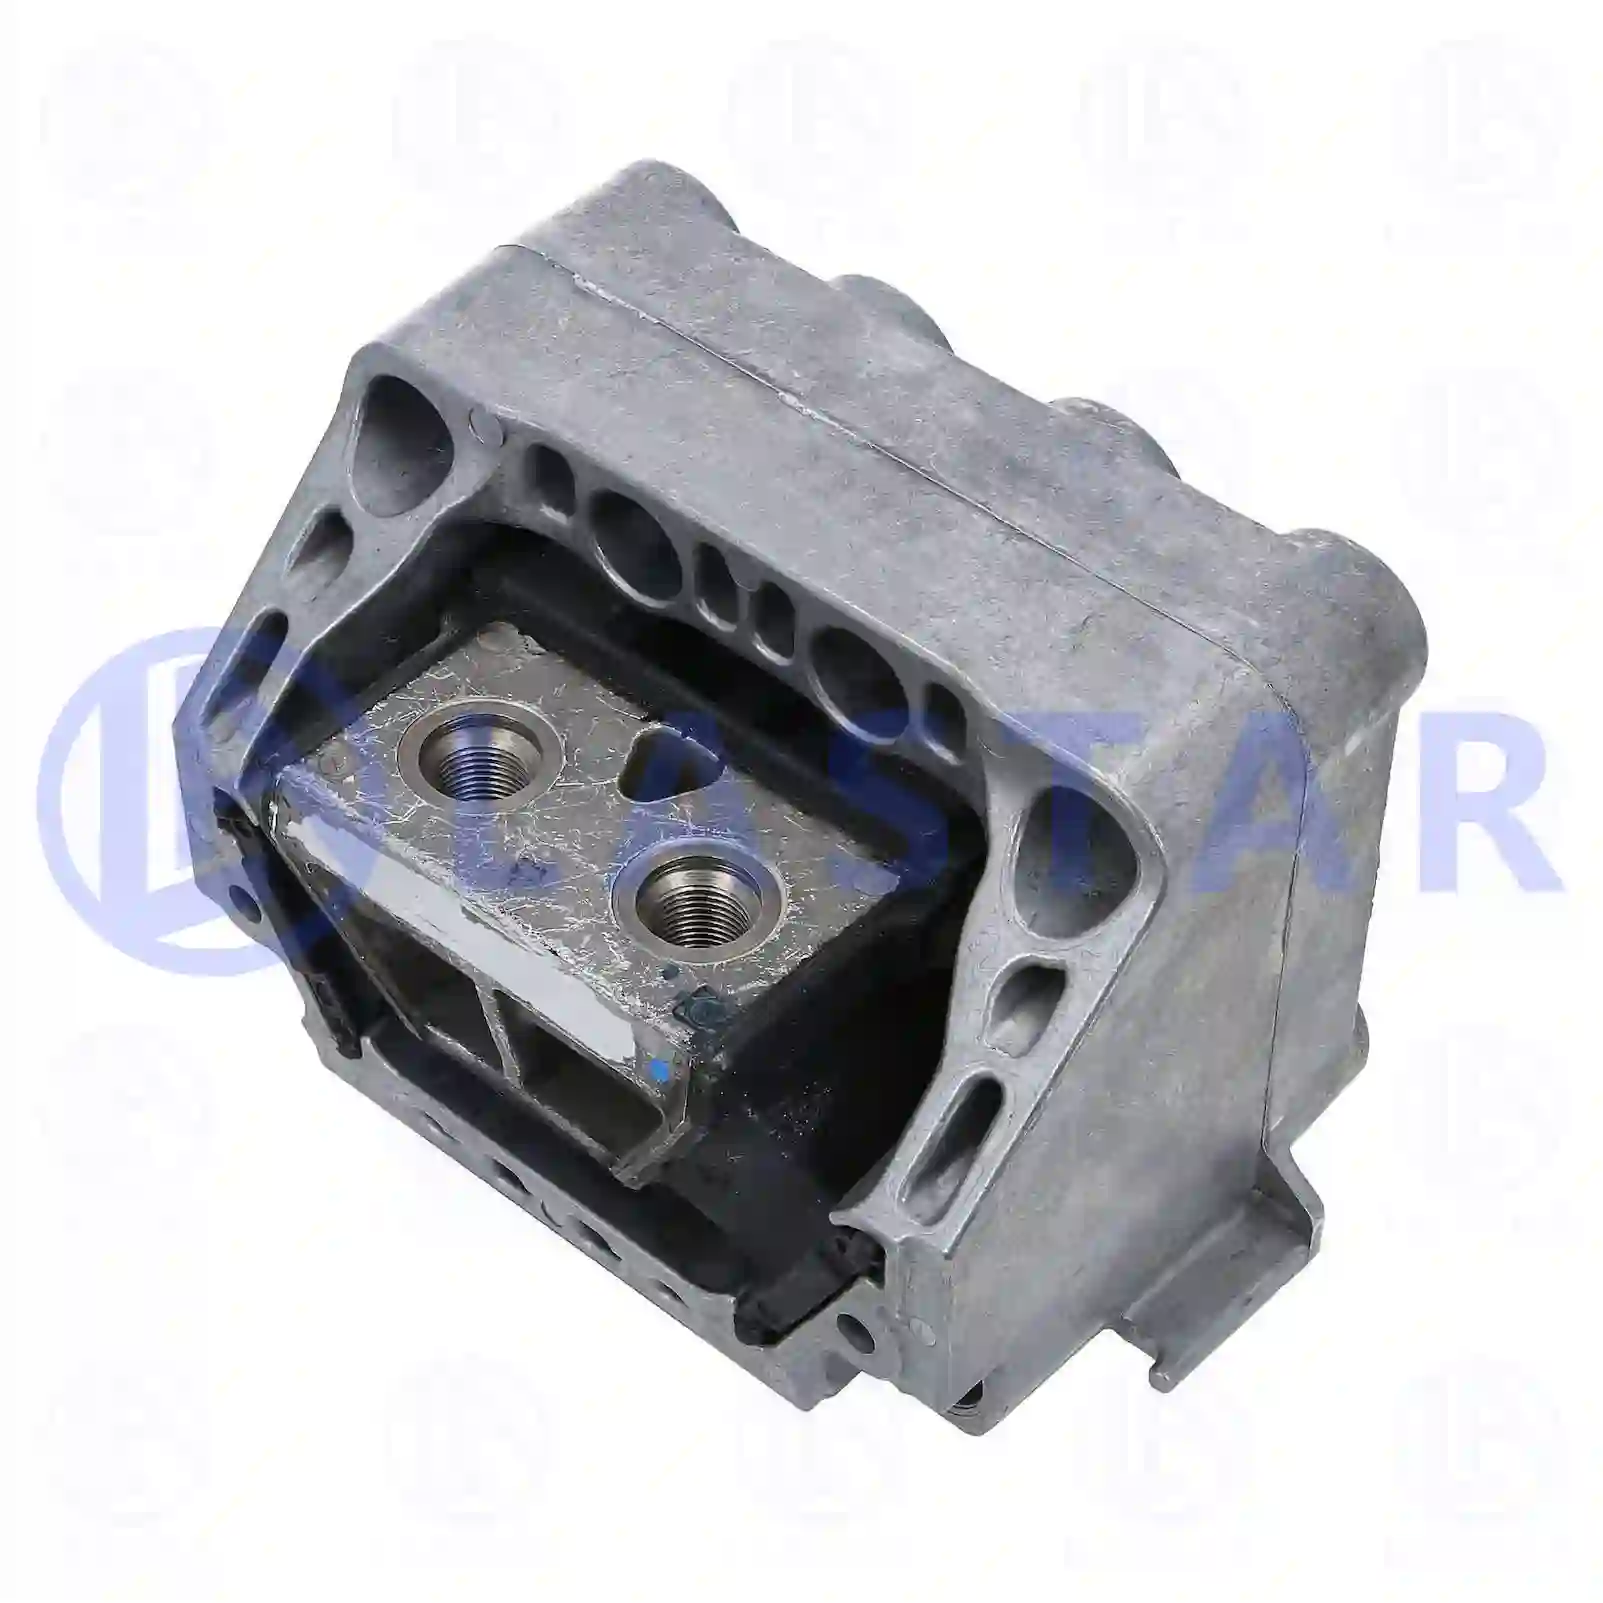 Engine mounting, 77702457, 9602412313 ||  77702457 Lastar Spare Part | Truck Spare Parts, Auotomotive Spare Parts Engine mounting, 77702457, 9602412313 ||  77702457 Lastar Spare Part | Truck Spare Parts, Auotomotive Spare Parts